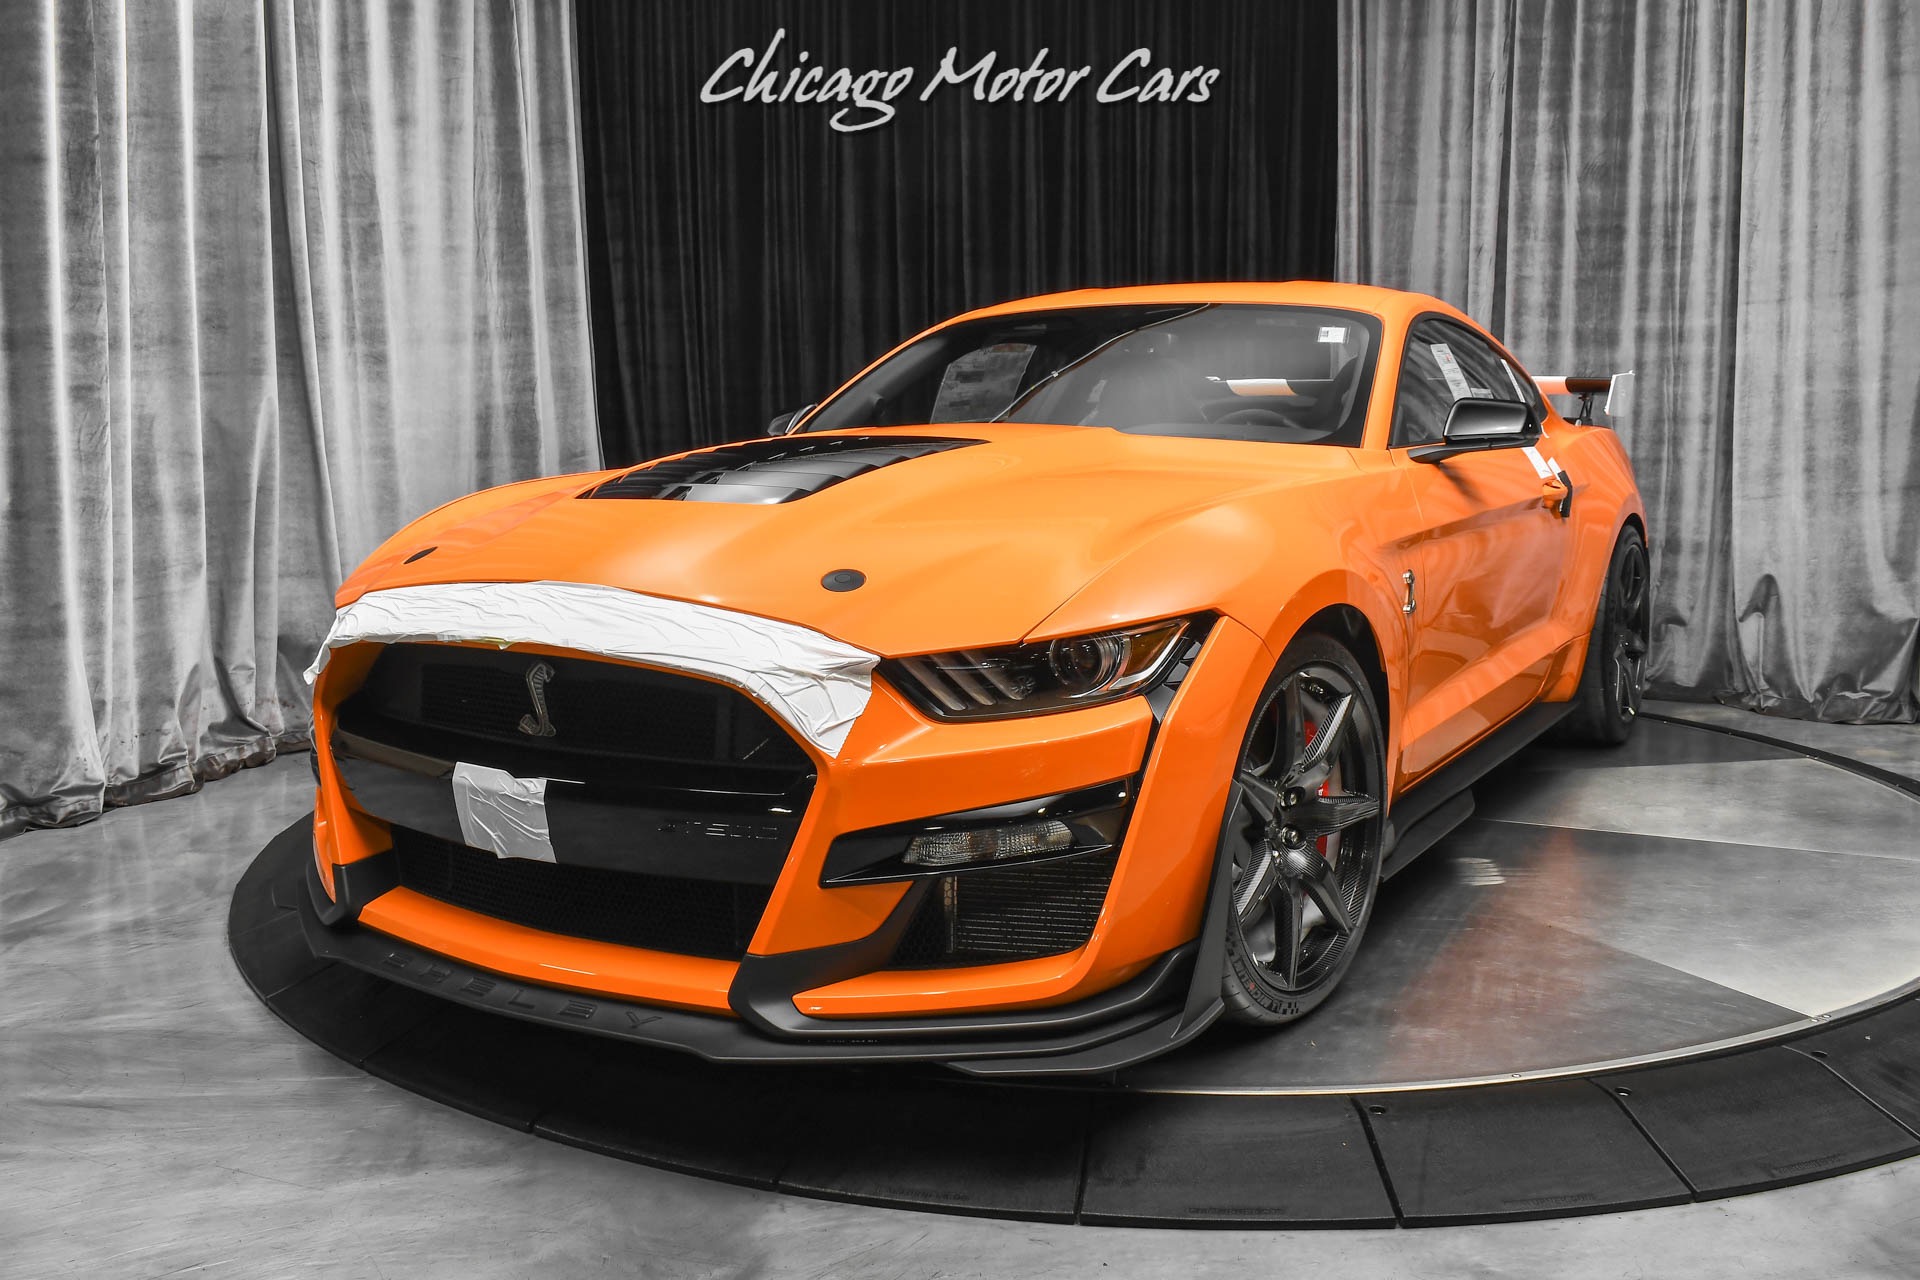 Used-2021-Ford-Mustang-Shelby-GT500-TRACK-PACK-CARBON-FIBER-DELIVERY-MILES-STILL-IN-THE-WRAPPER